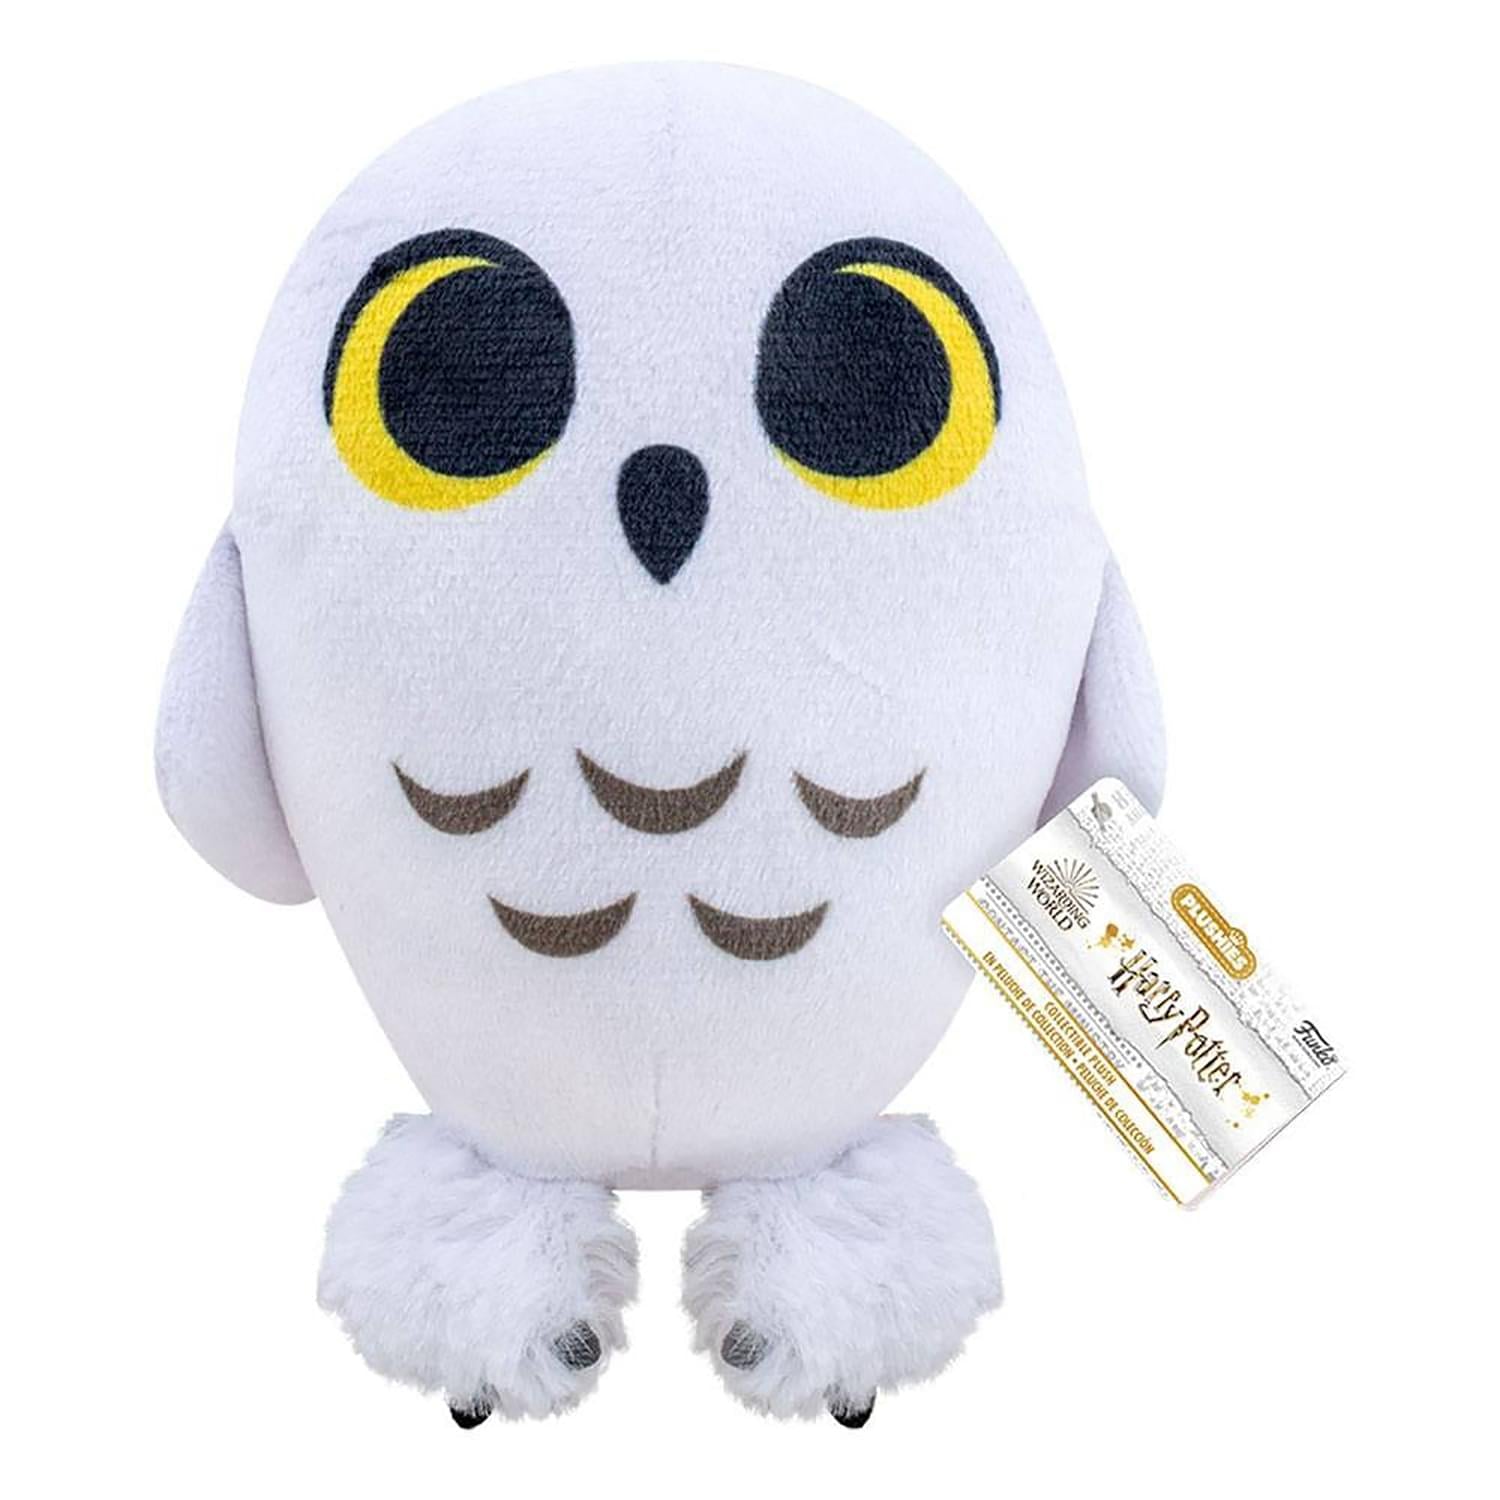 Harry Potter 4 Inch Funko Plush | Holiday Hedwig